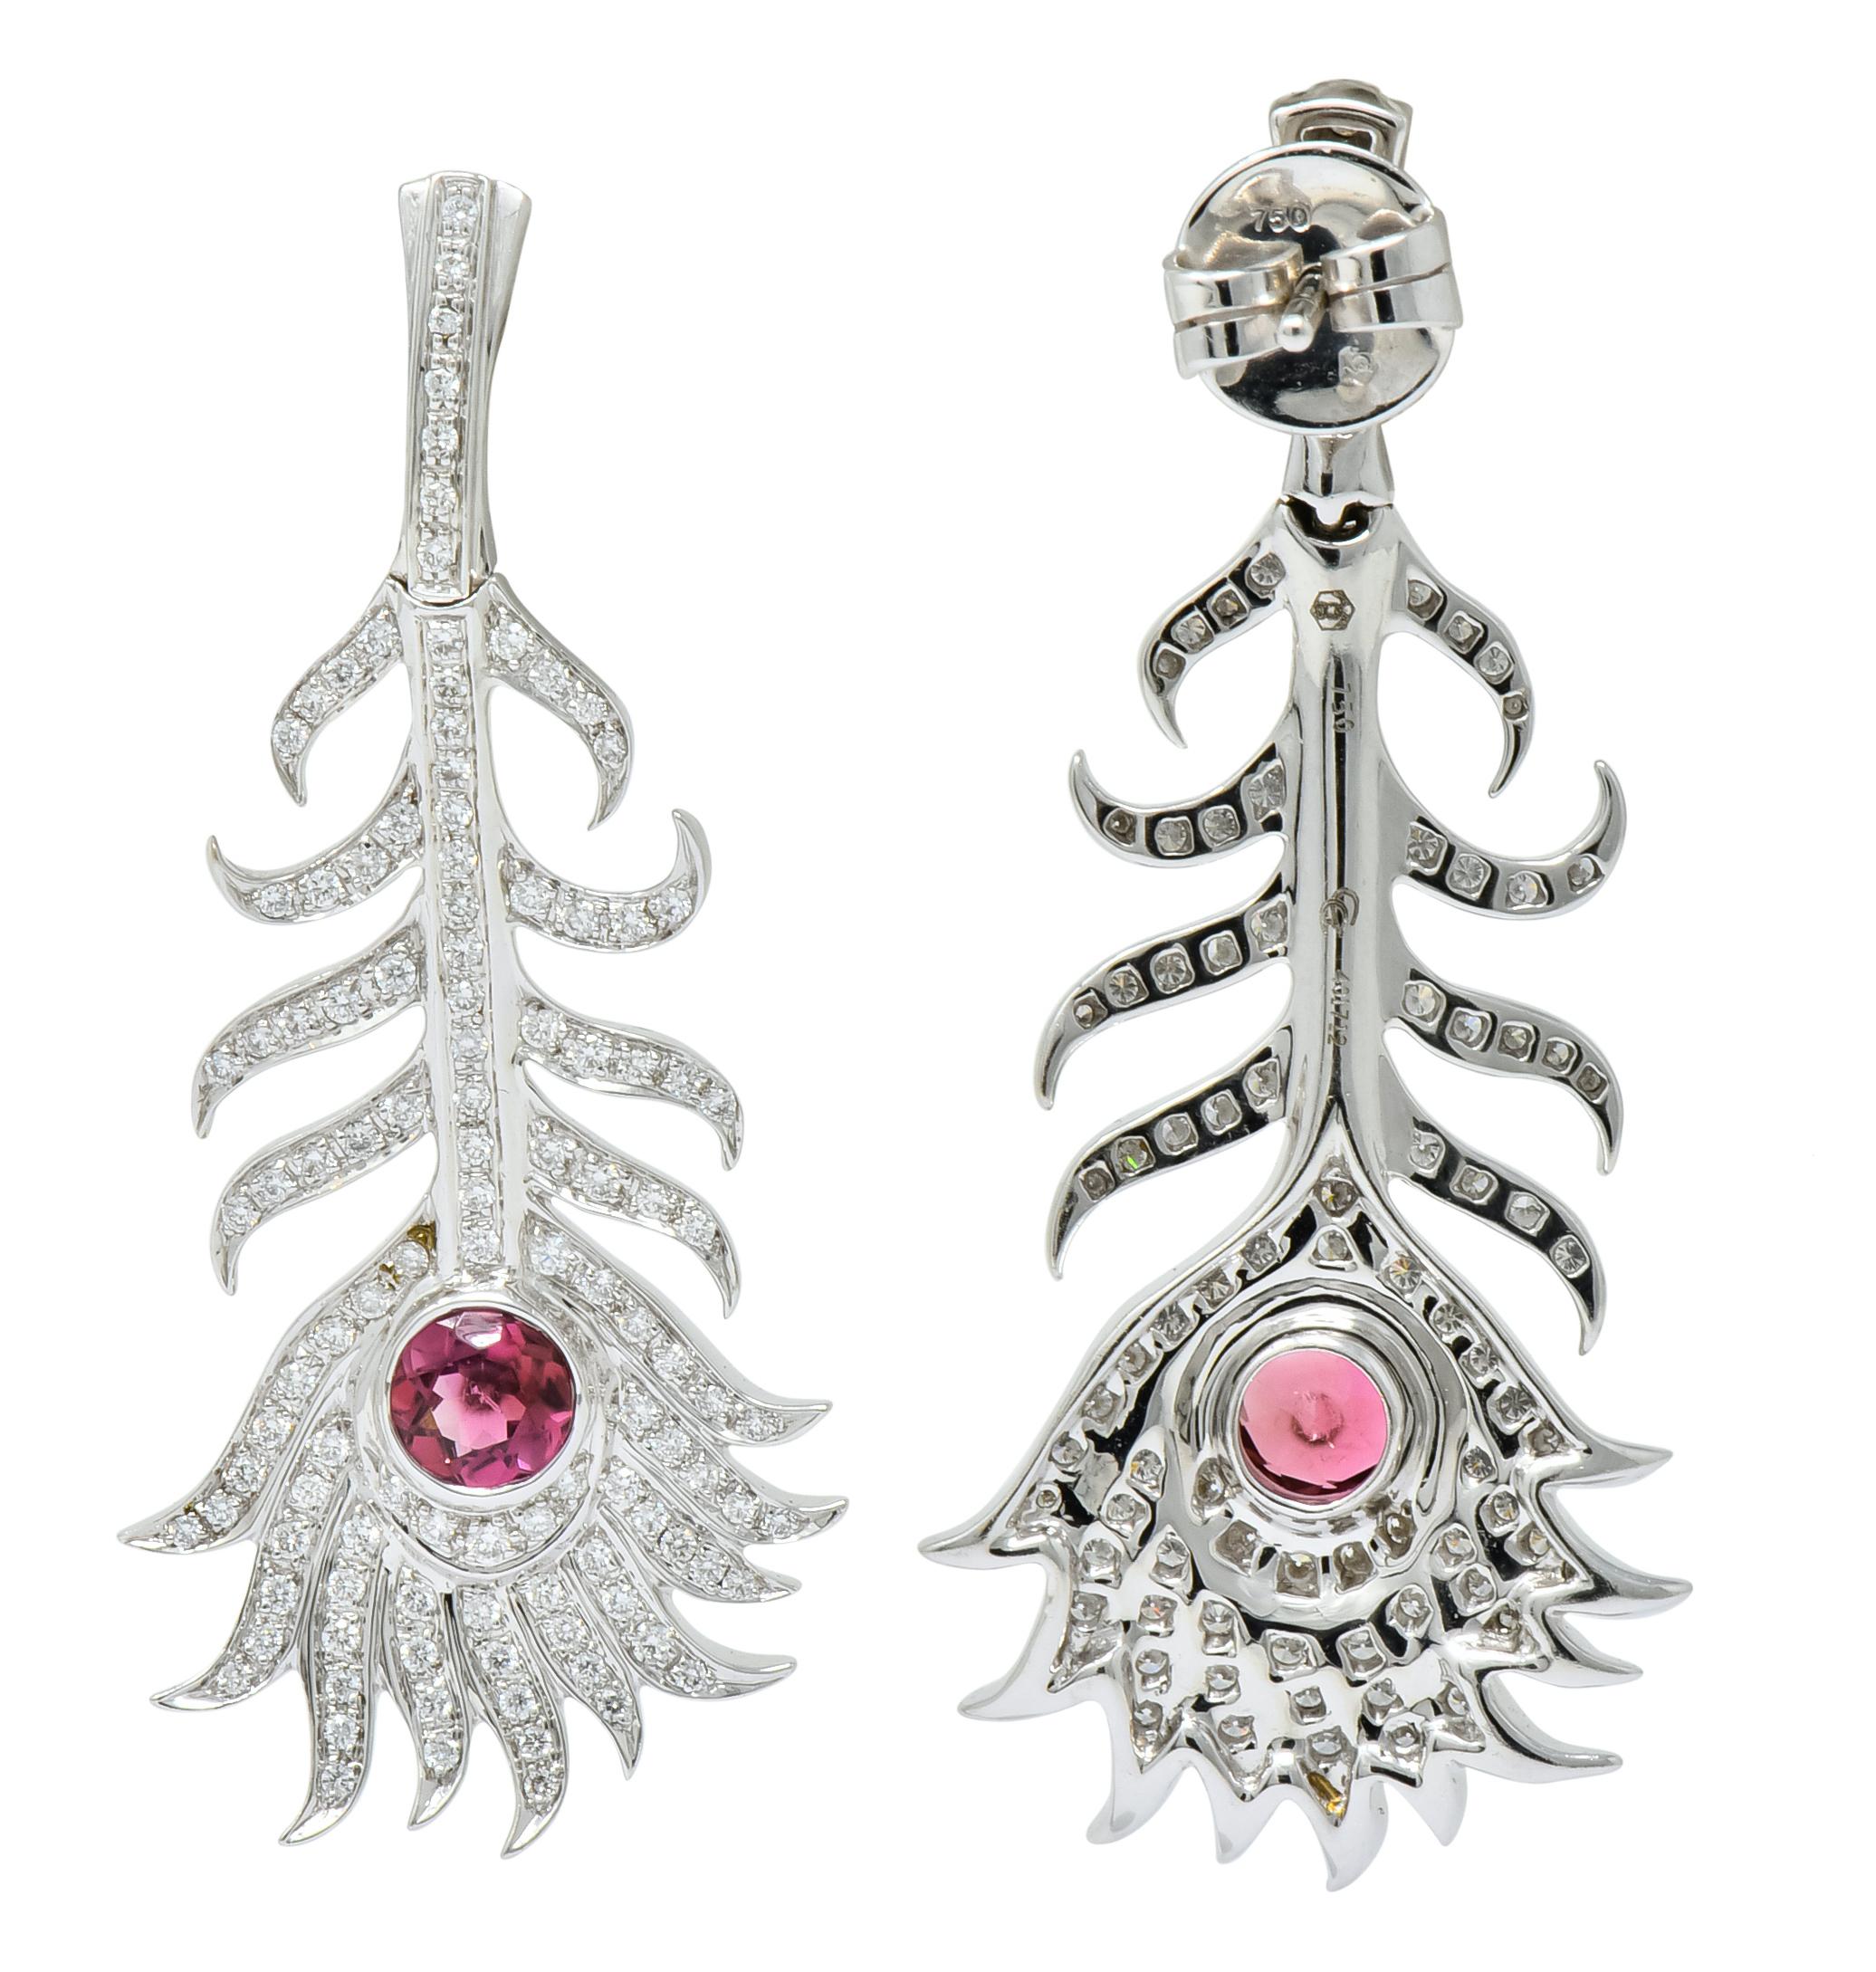 Each designed as a peacock feather with pavé set round brilliant cut diamonds weighing approximately 1.80 carats total, E-F color and VS clarity

Accented by bezel set tourmaline, deep bubble gum in color, weighing approximately 1.25 carats